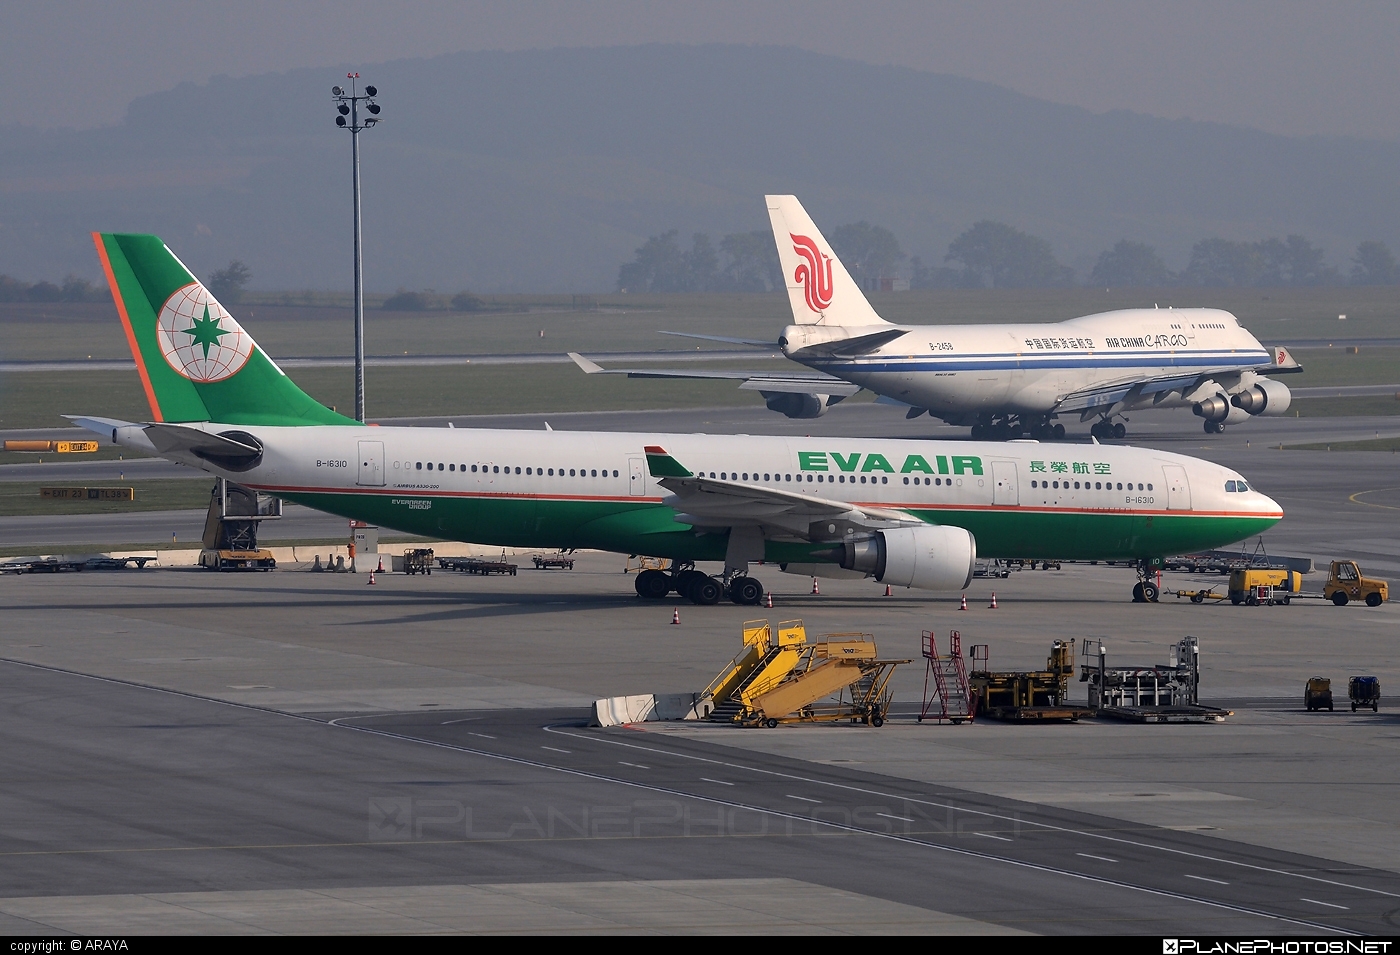 Airbus A330-203 - B-16310 operated by EVA Air #a330 #a330family #airbus #airbus330